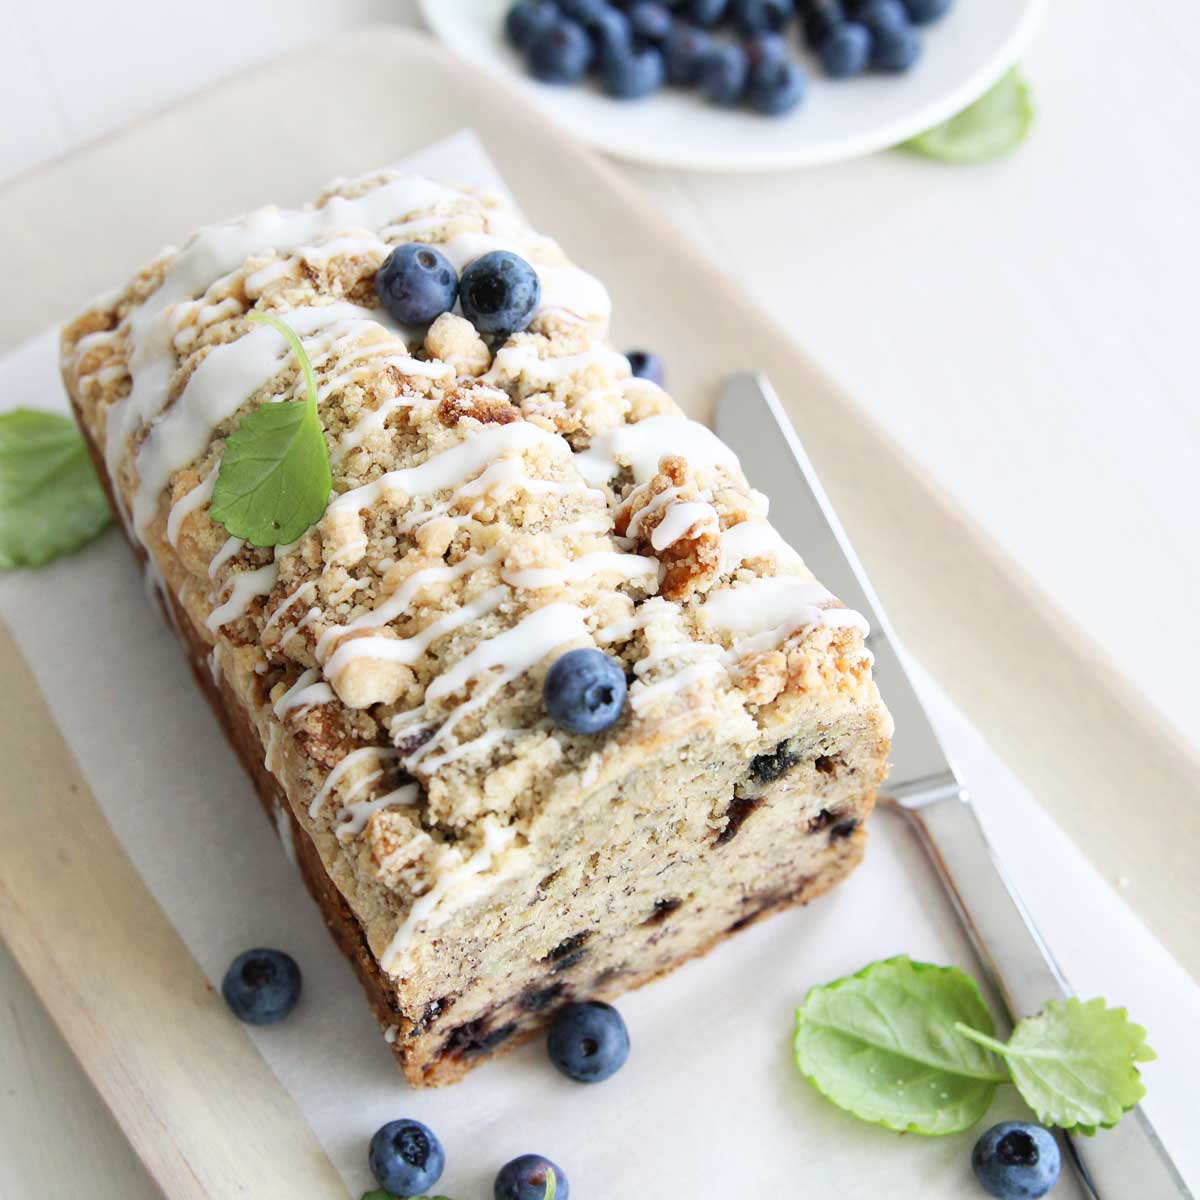 Blueberry Banana Bread with Oats & Streusel (Eggless, Dairy Free) - Red Bean Mochi Cake